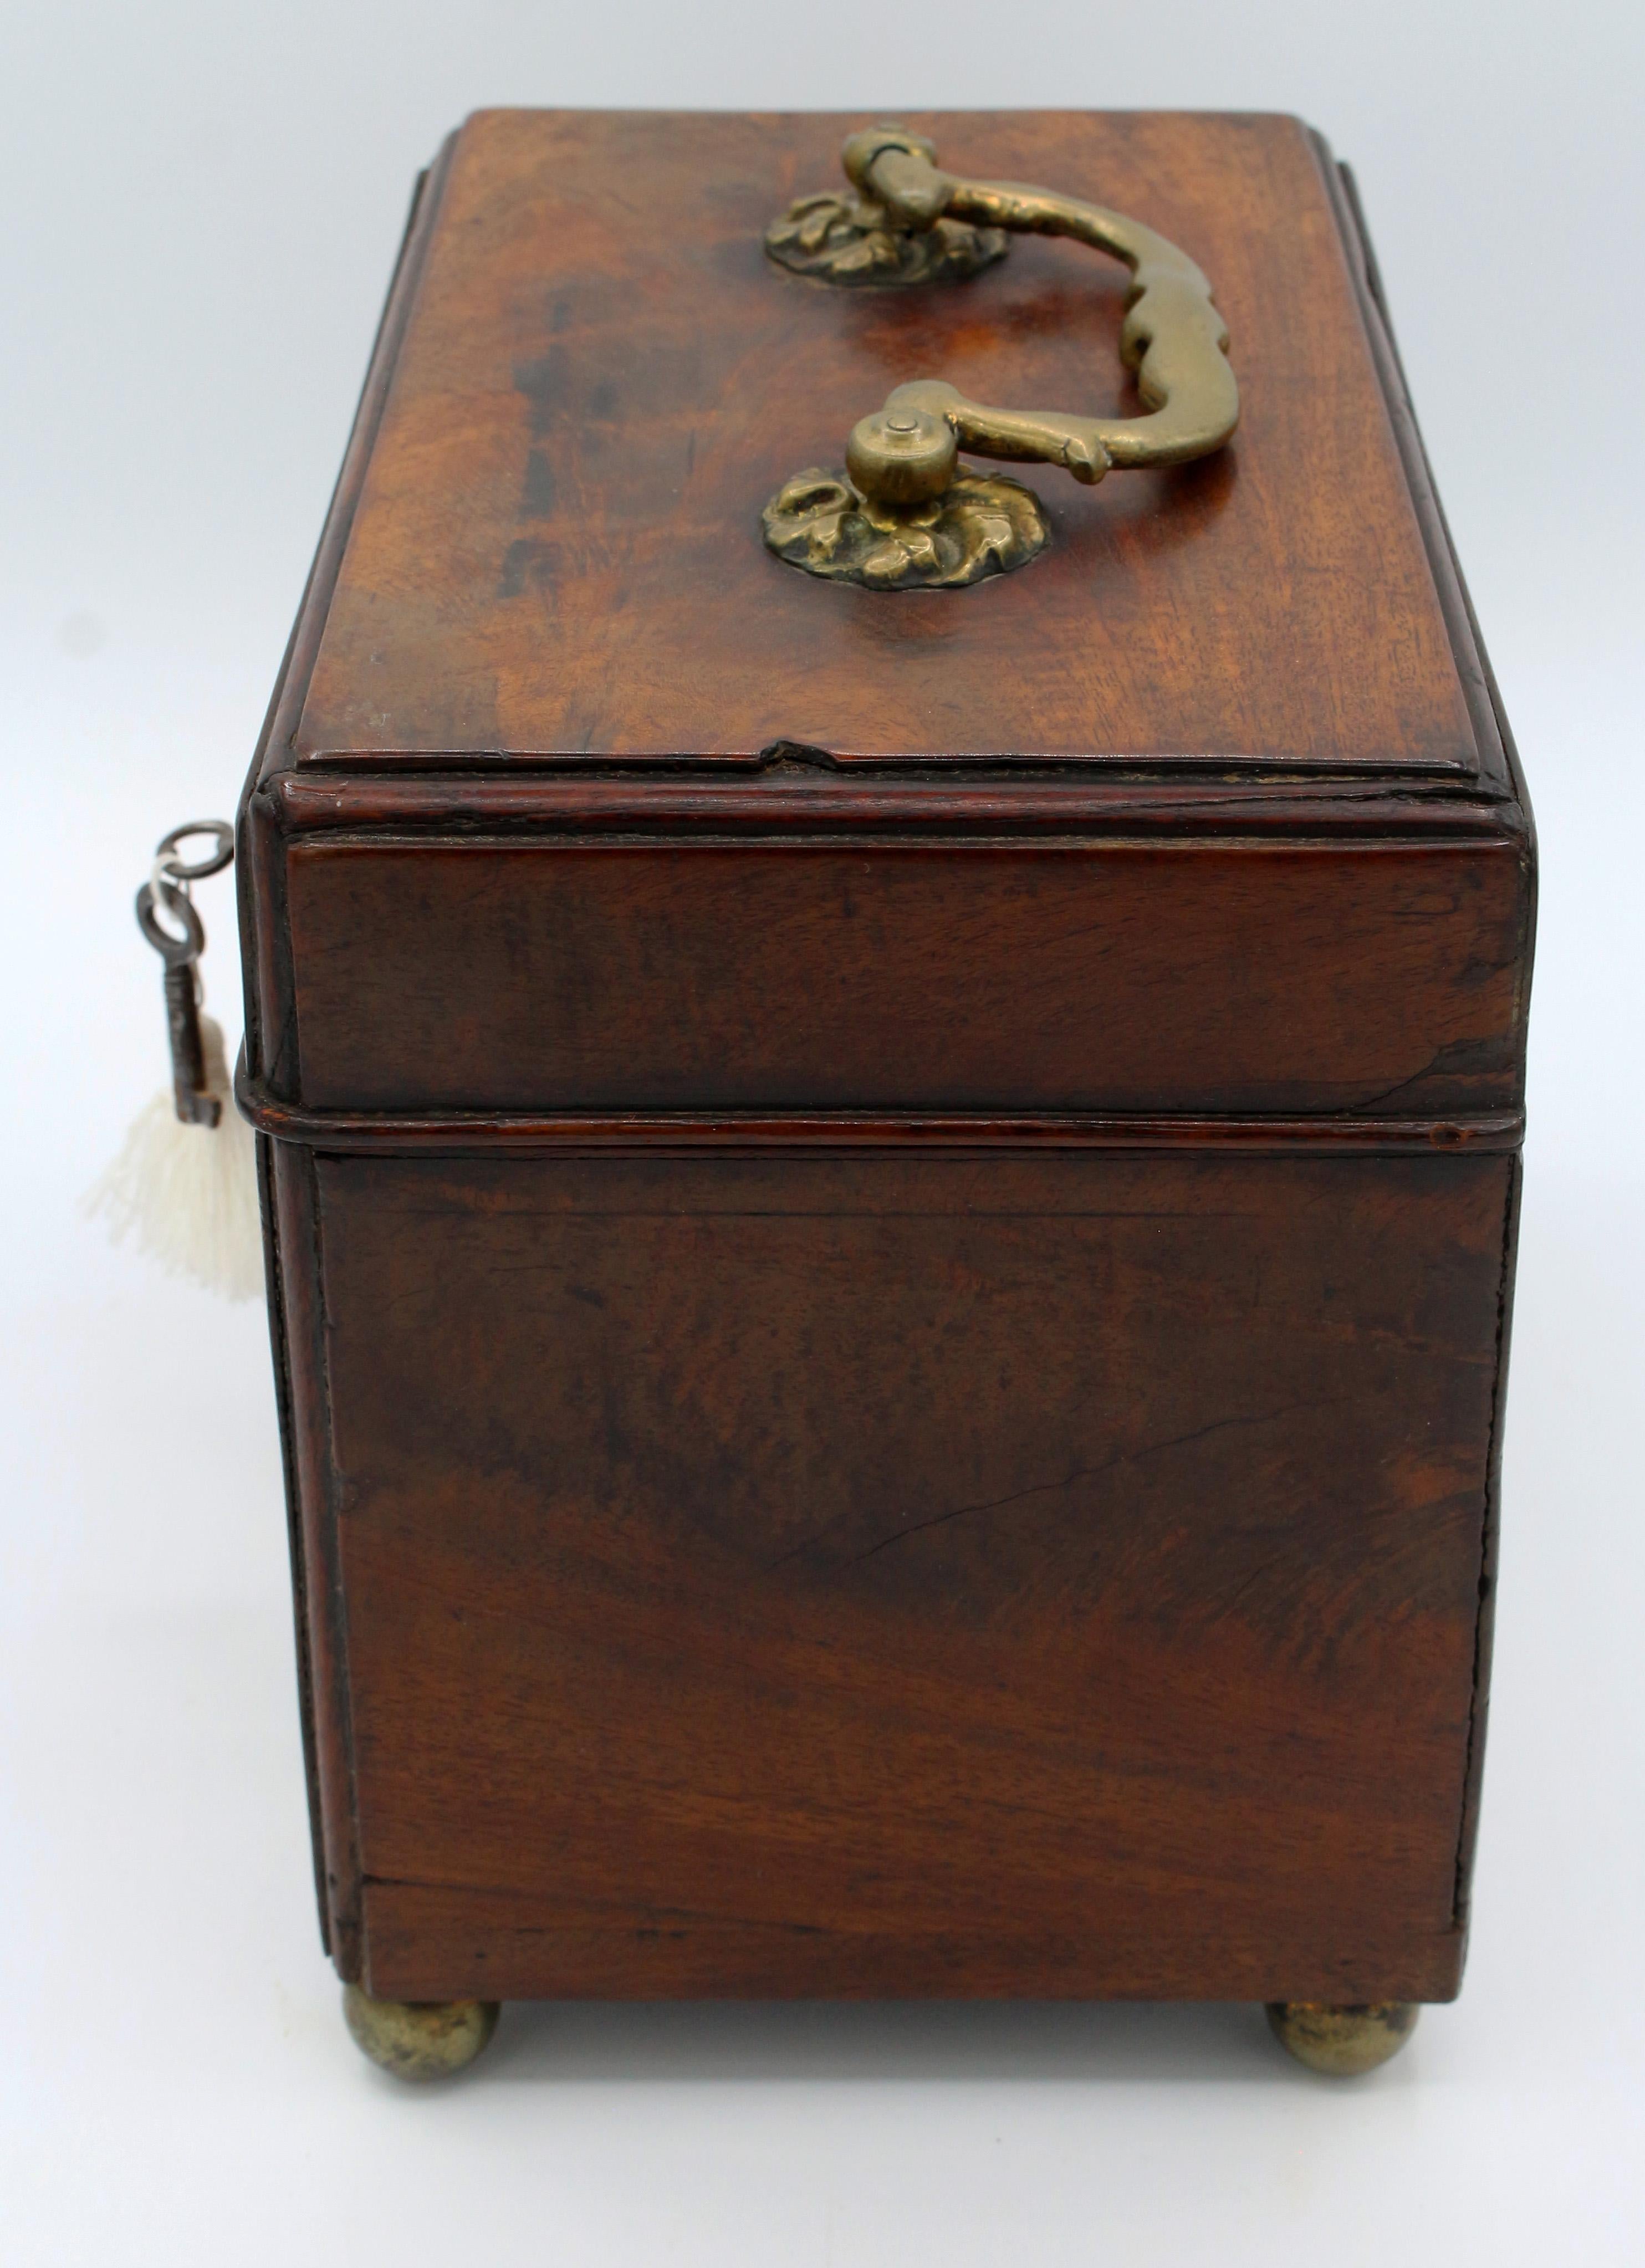 George III tea caddy, circa 1765, English. Raised on later Regency brass ball feet. Mahogany on oak. Working lock. Alterations circa 1780 to the interior adding a spoon compartment and the escutcheon. Minor bumps & small veneer patch commensurate